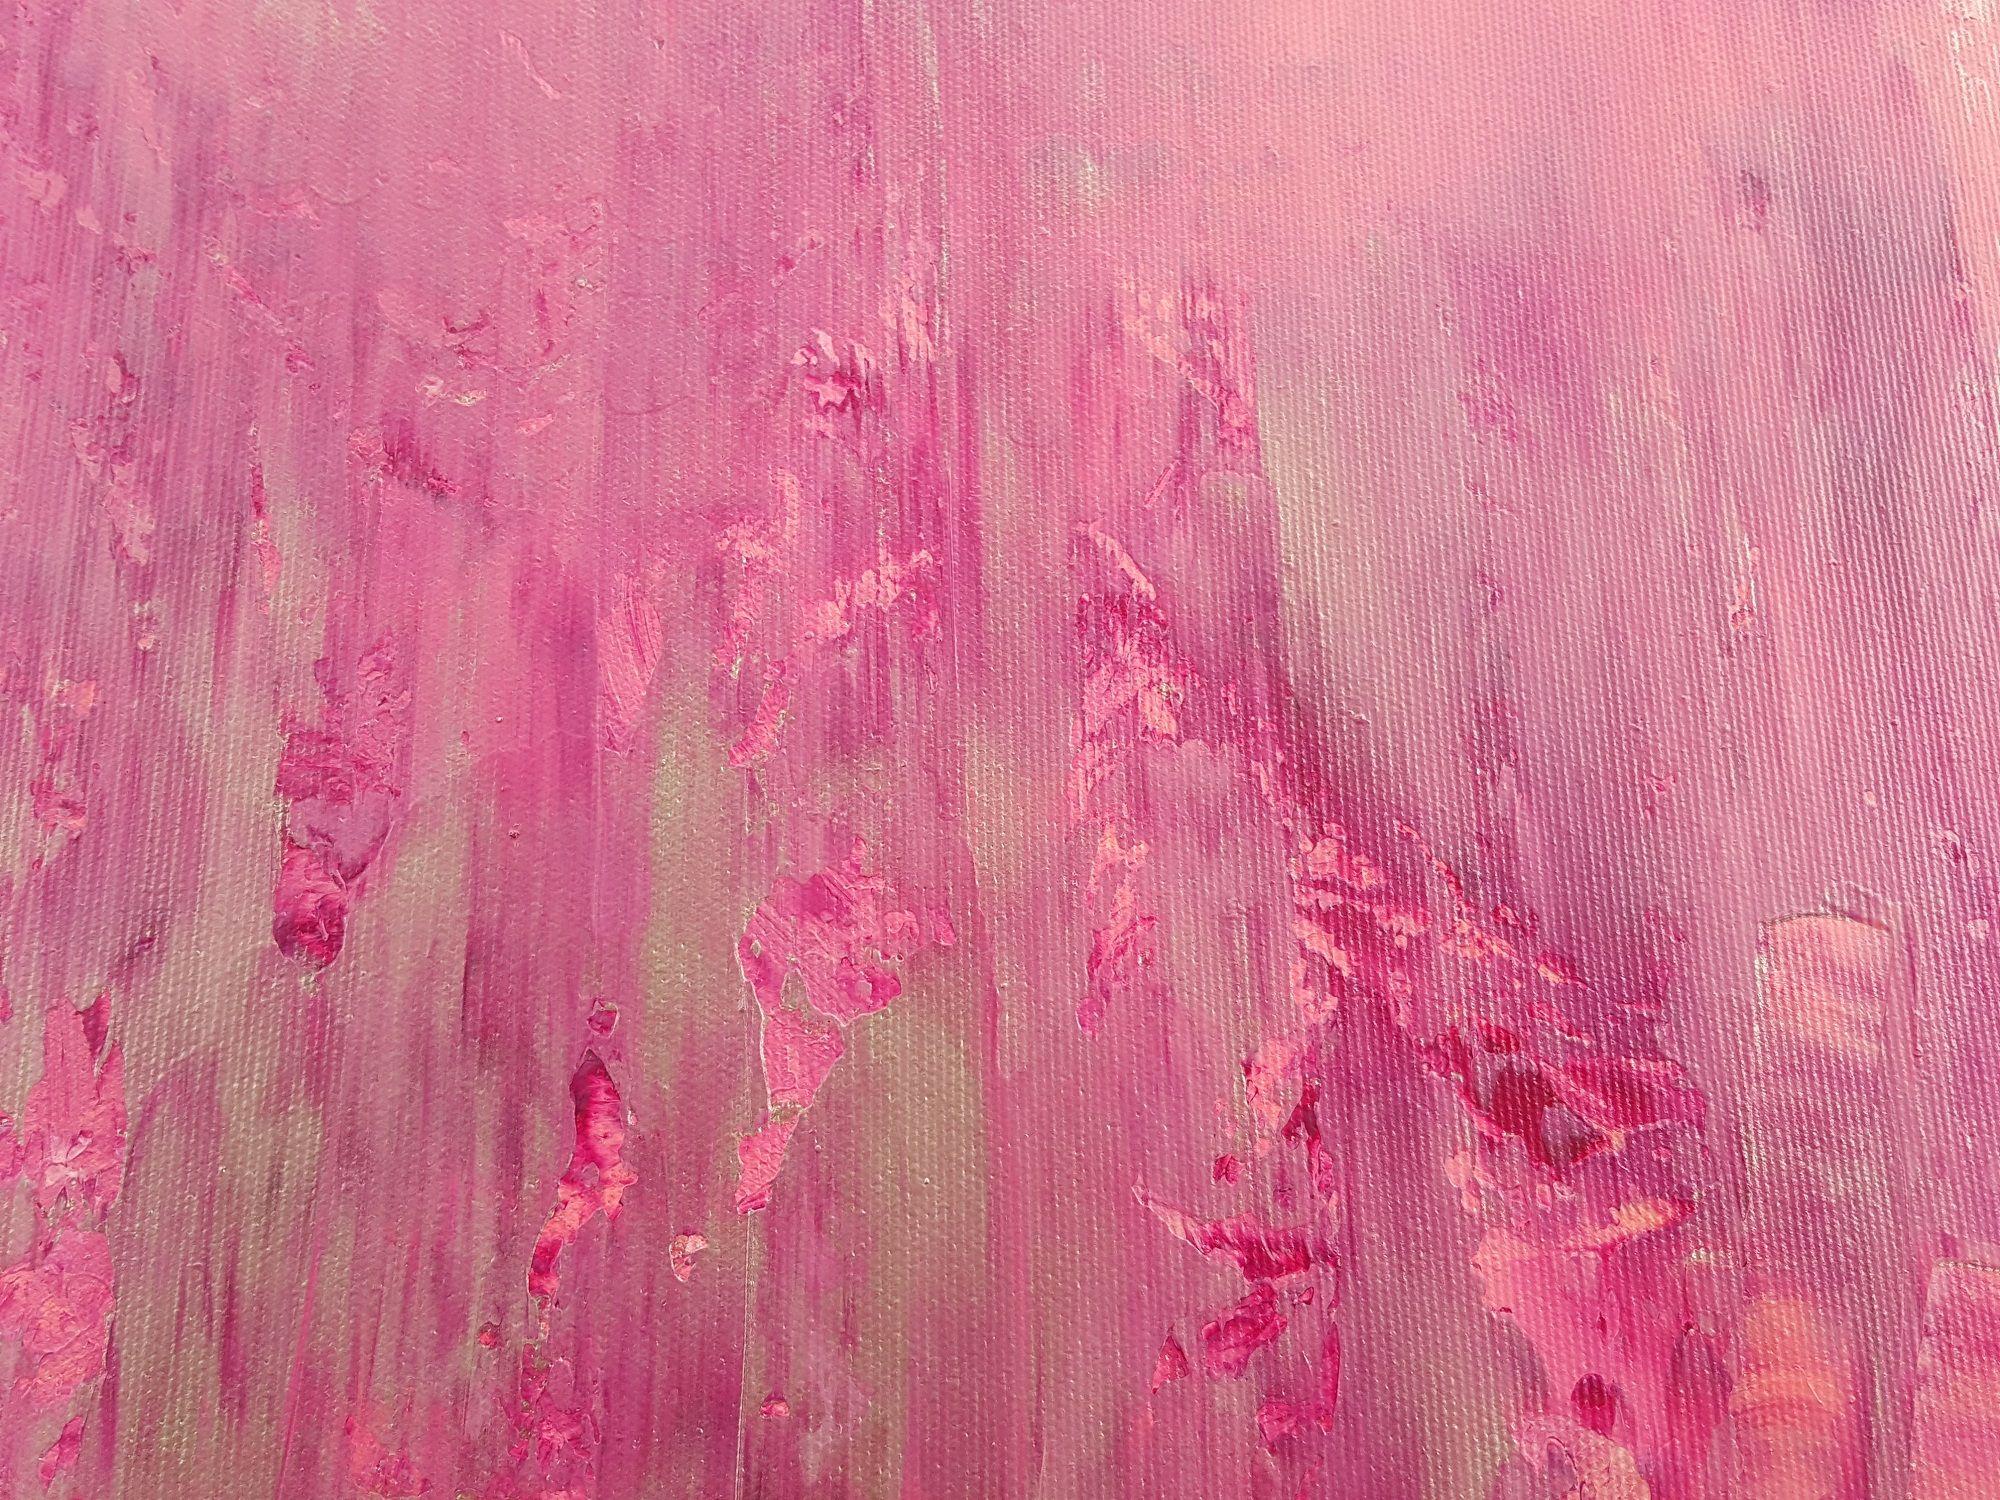 An original one of kind abstract painting with a gentle texture.    Shades of pink and purple-red with silver color.  The painting gives a sense of freshness and freedom and it will certainly brighten up even the darkest room.  It looks nice hanged